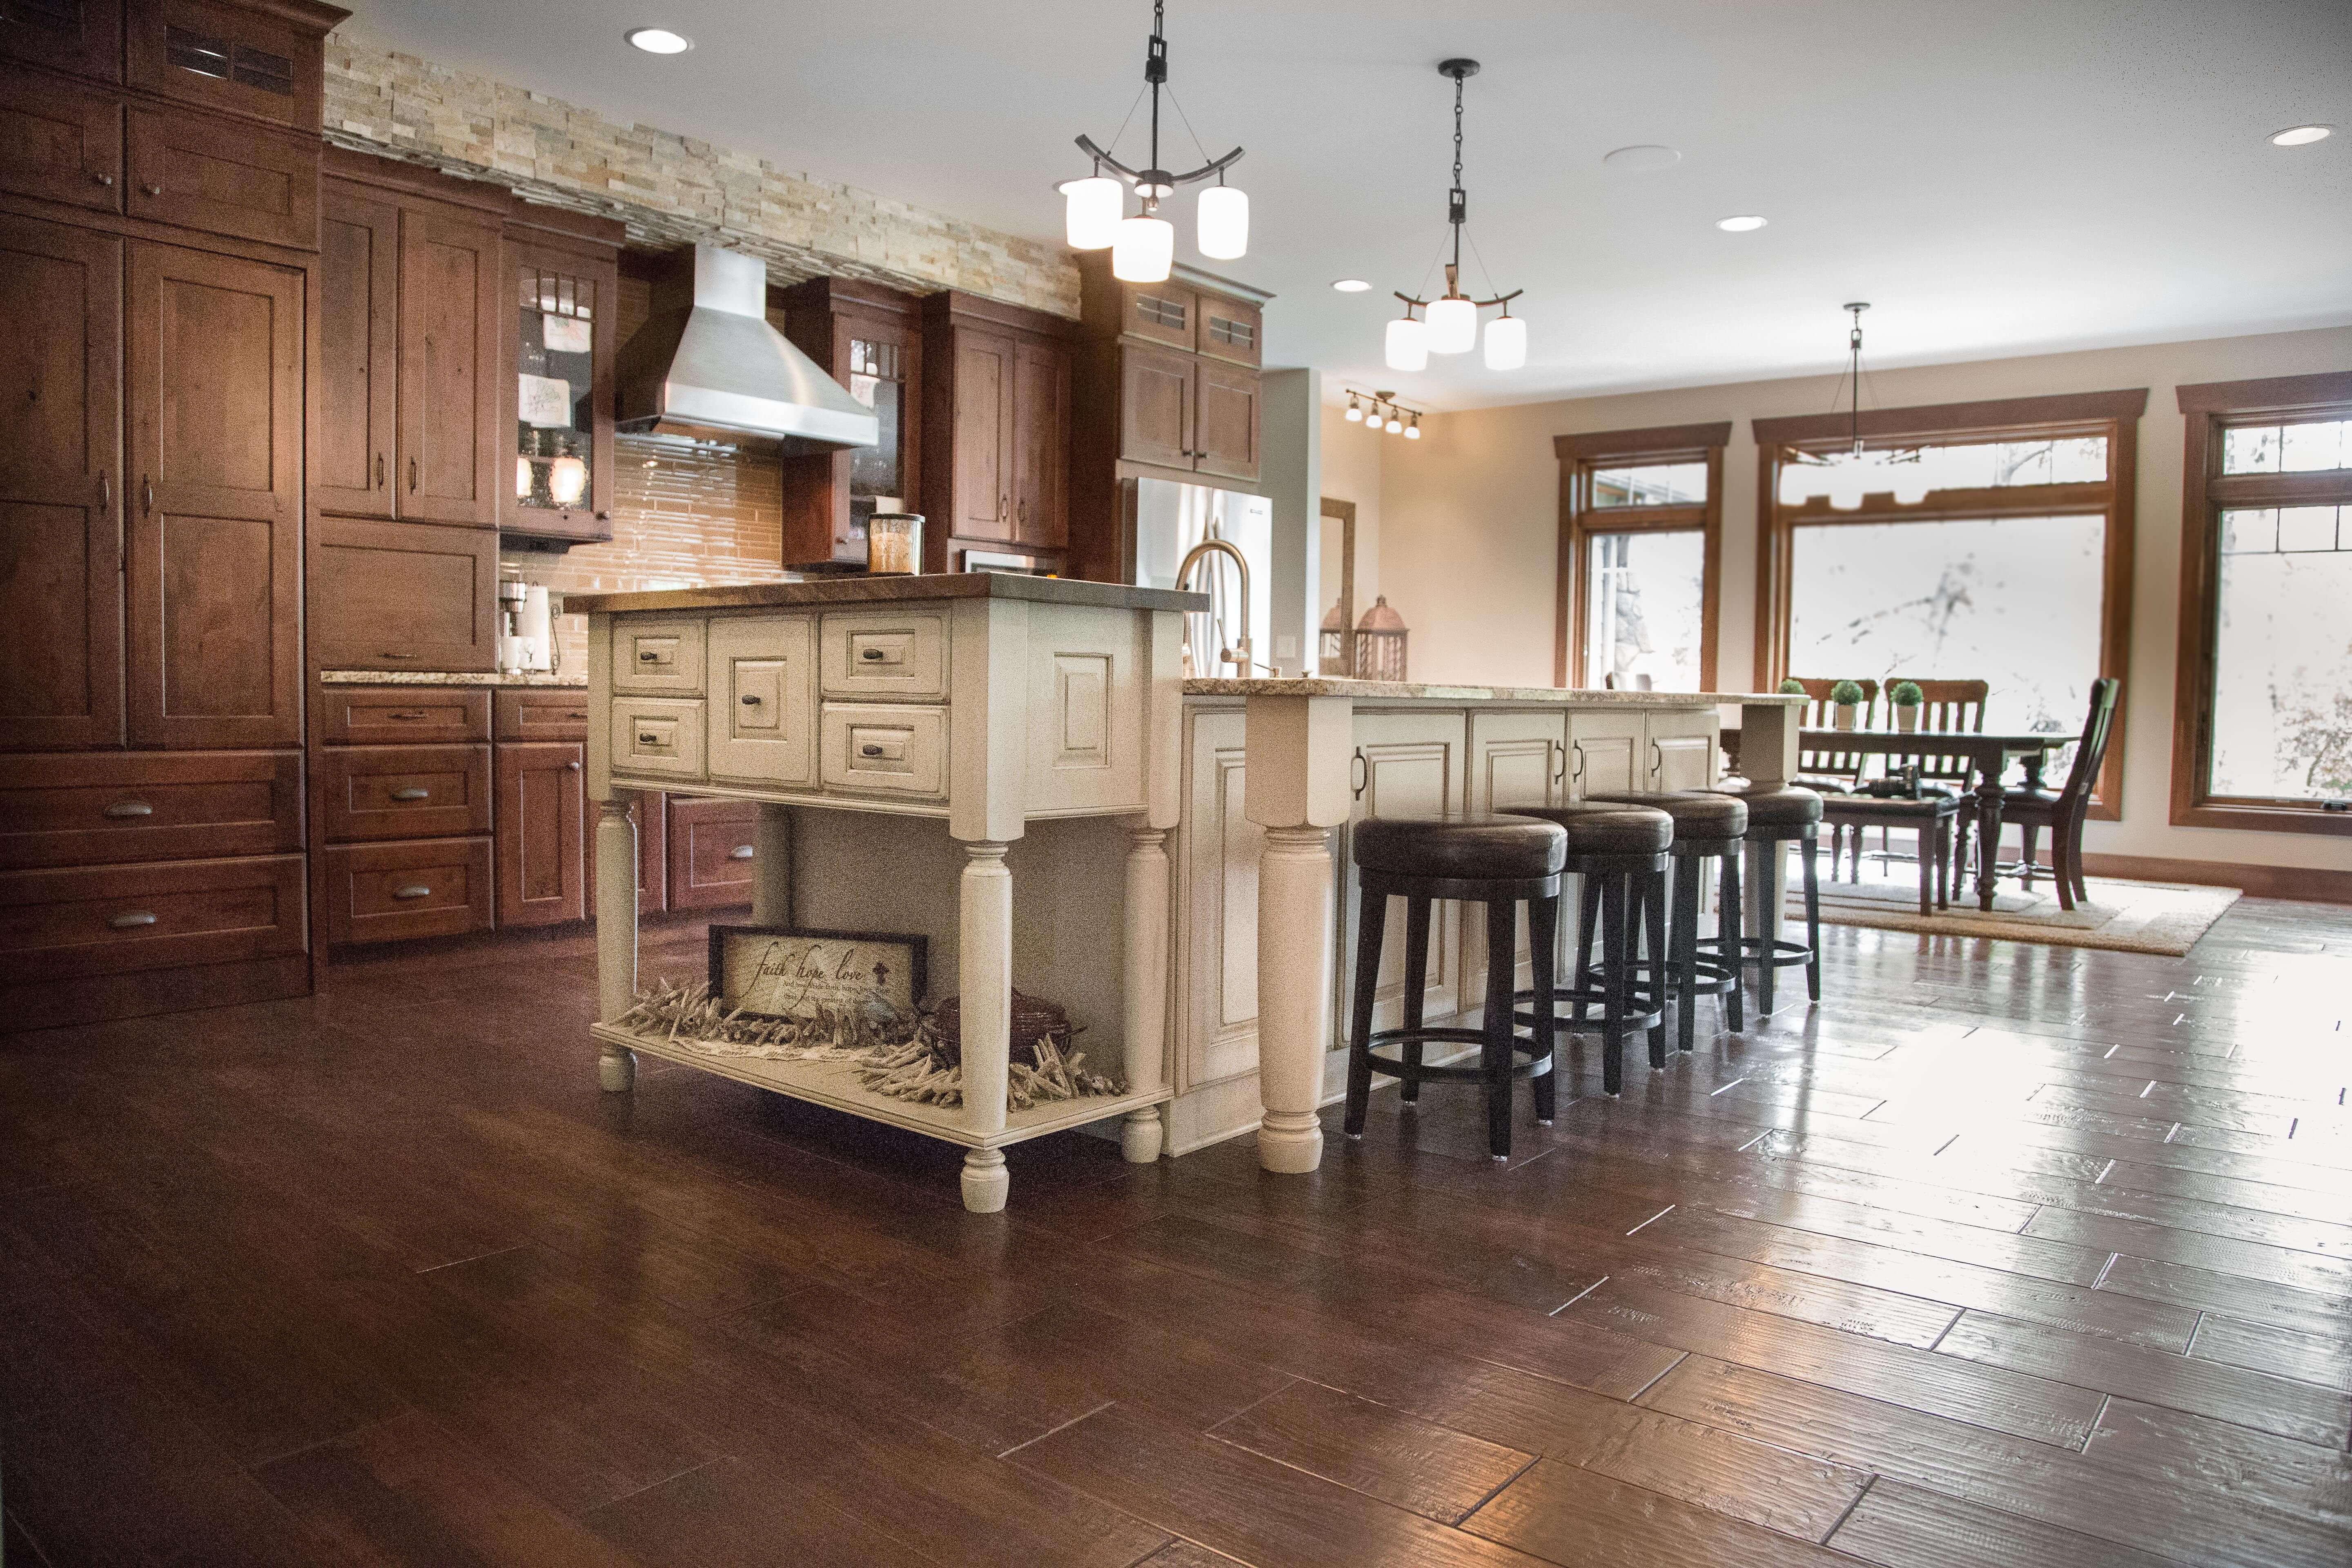 A large single wall kitchen with a kitchen island with a traditional country style featuring a rustic kitchen island.